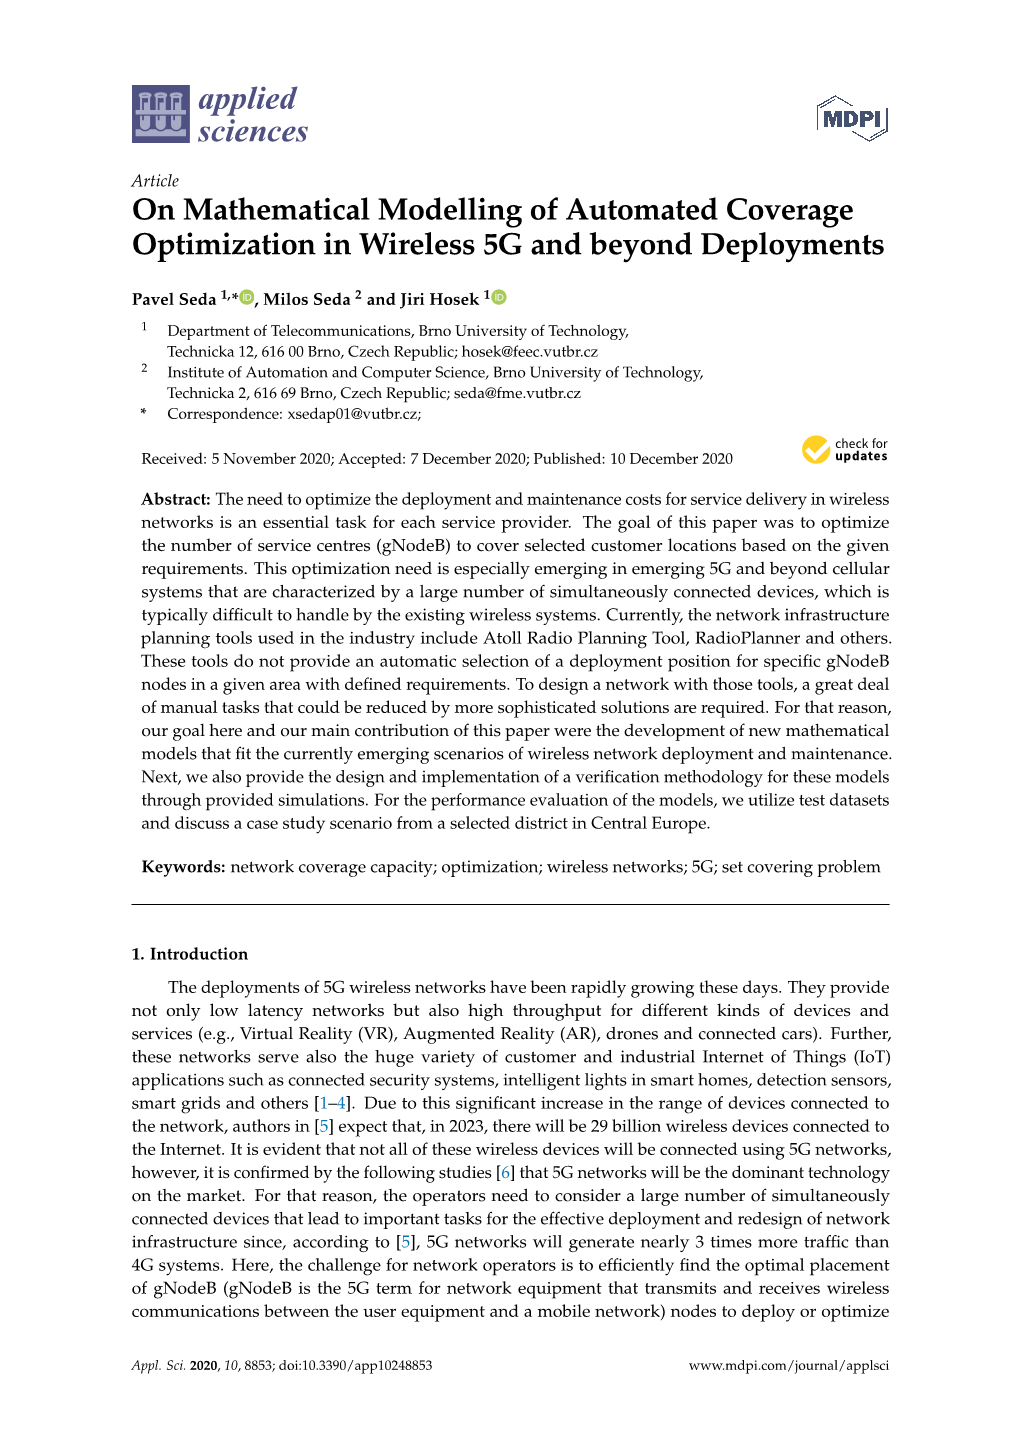 On Mathematical Modelling of Automated Coverage Optimization in Wireless 5G and Beyond Deployments